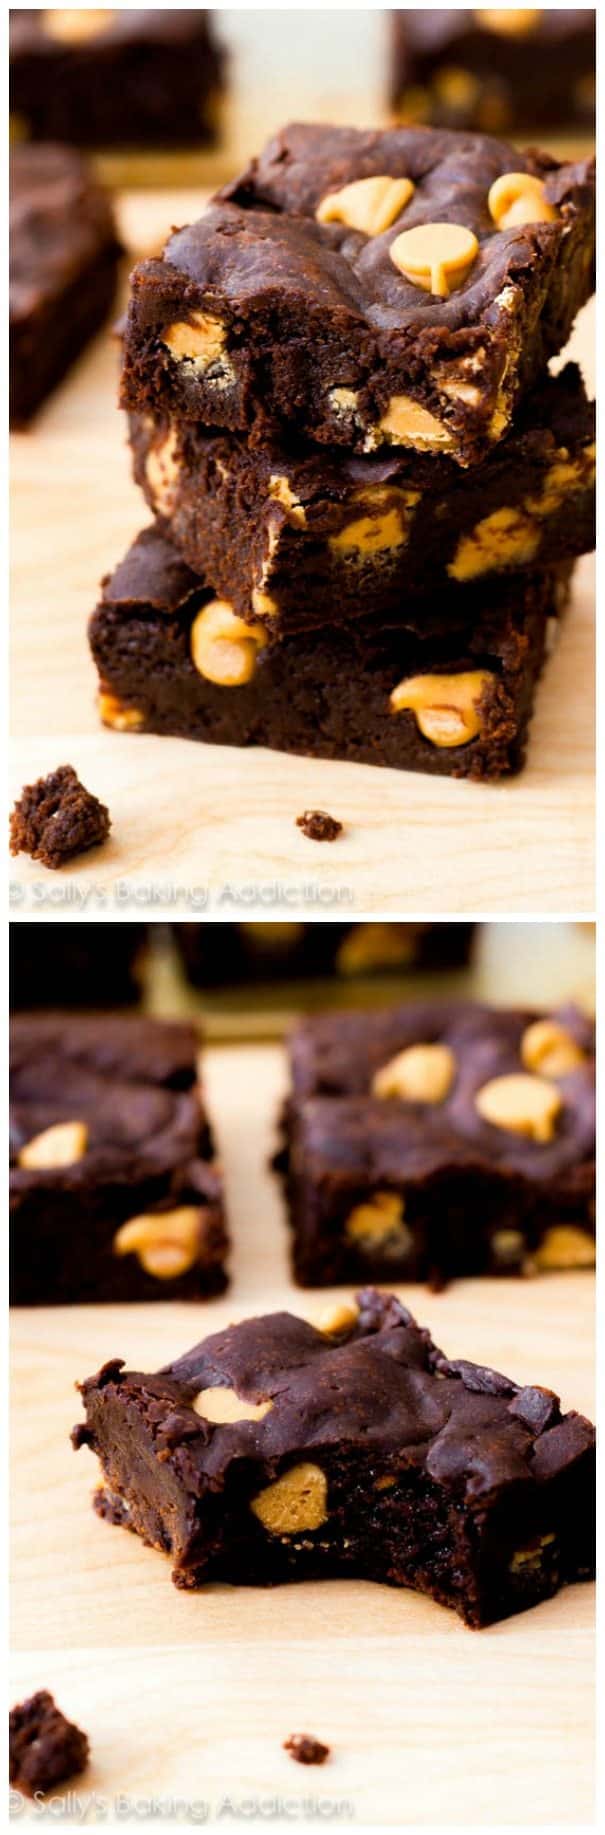 2 images of brownies with peanut butter chips